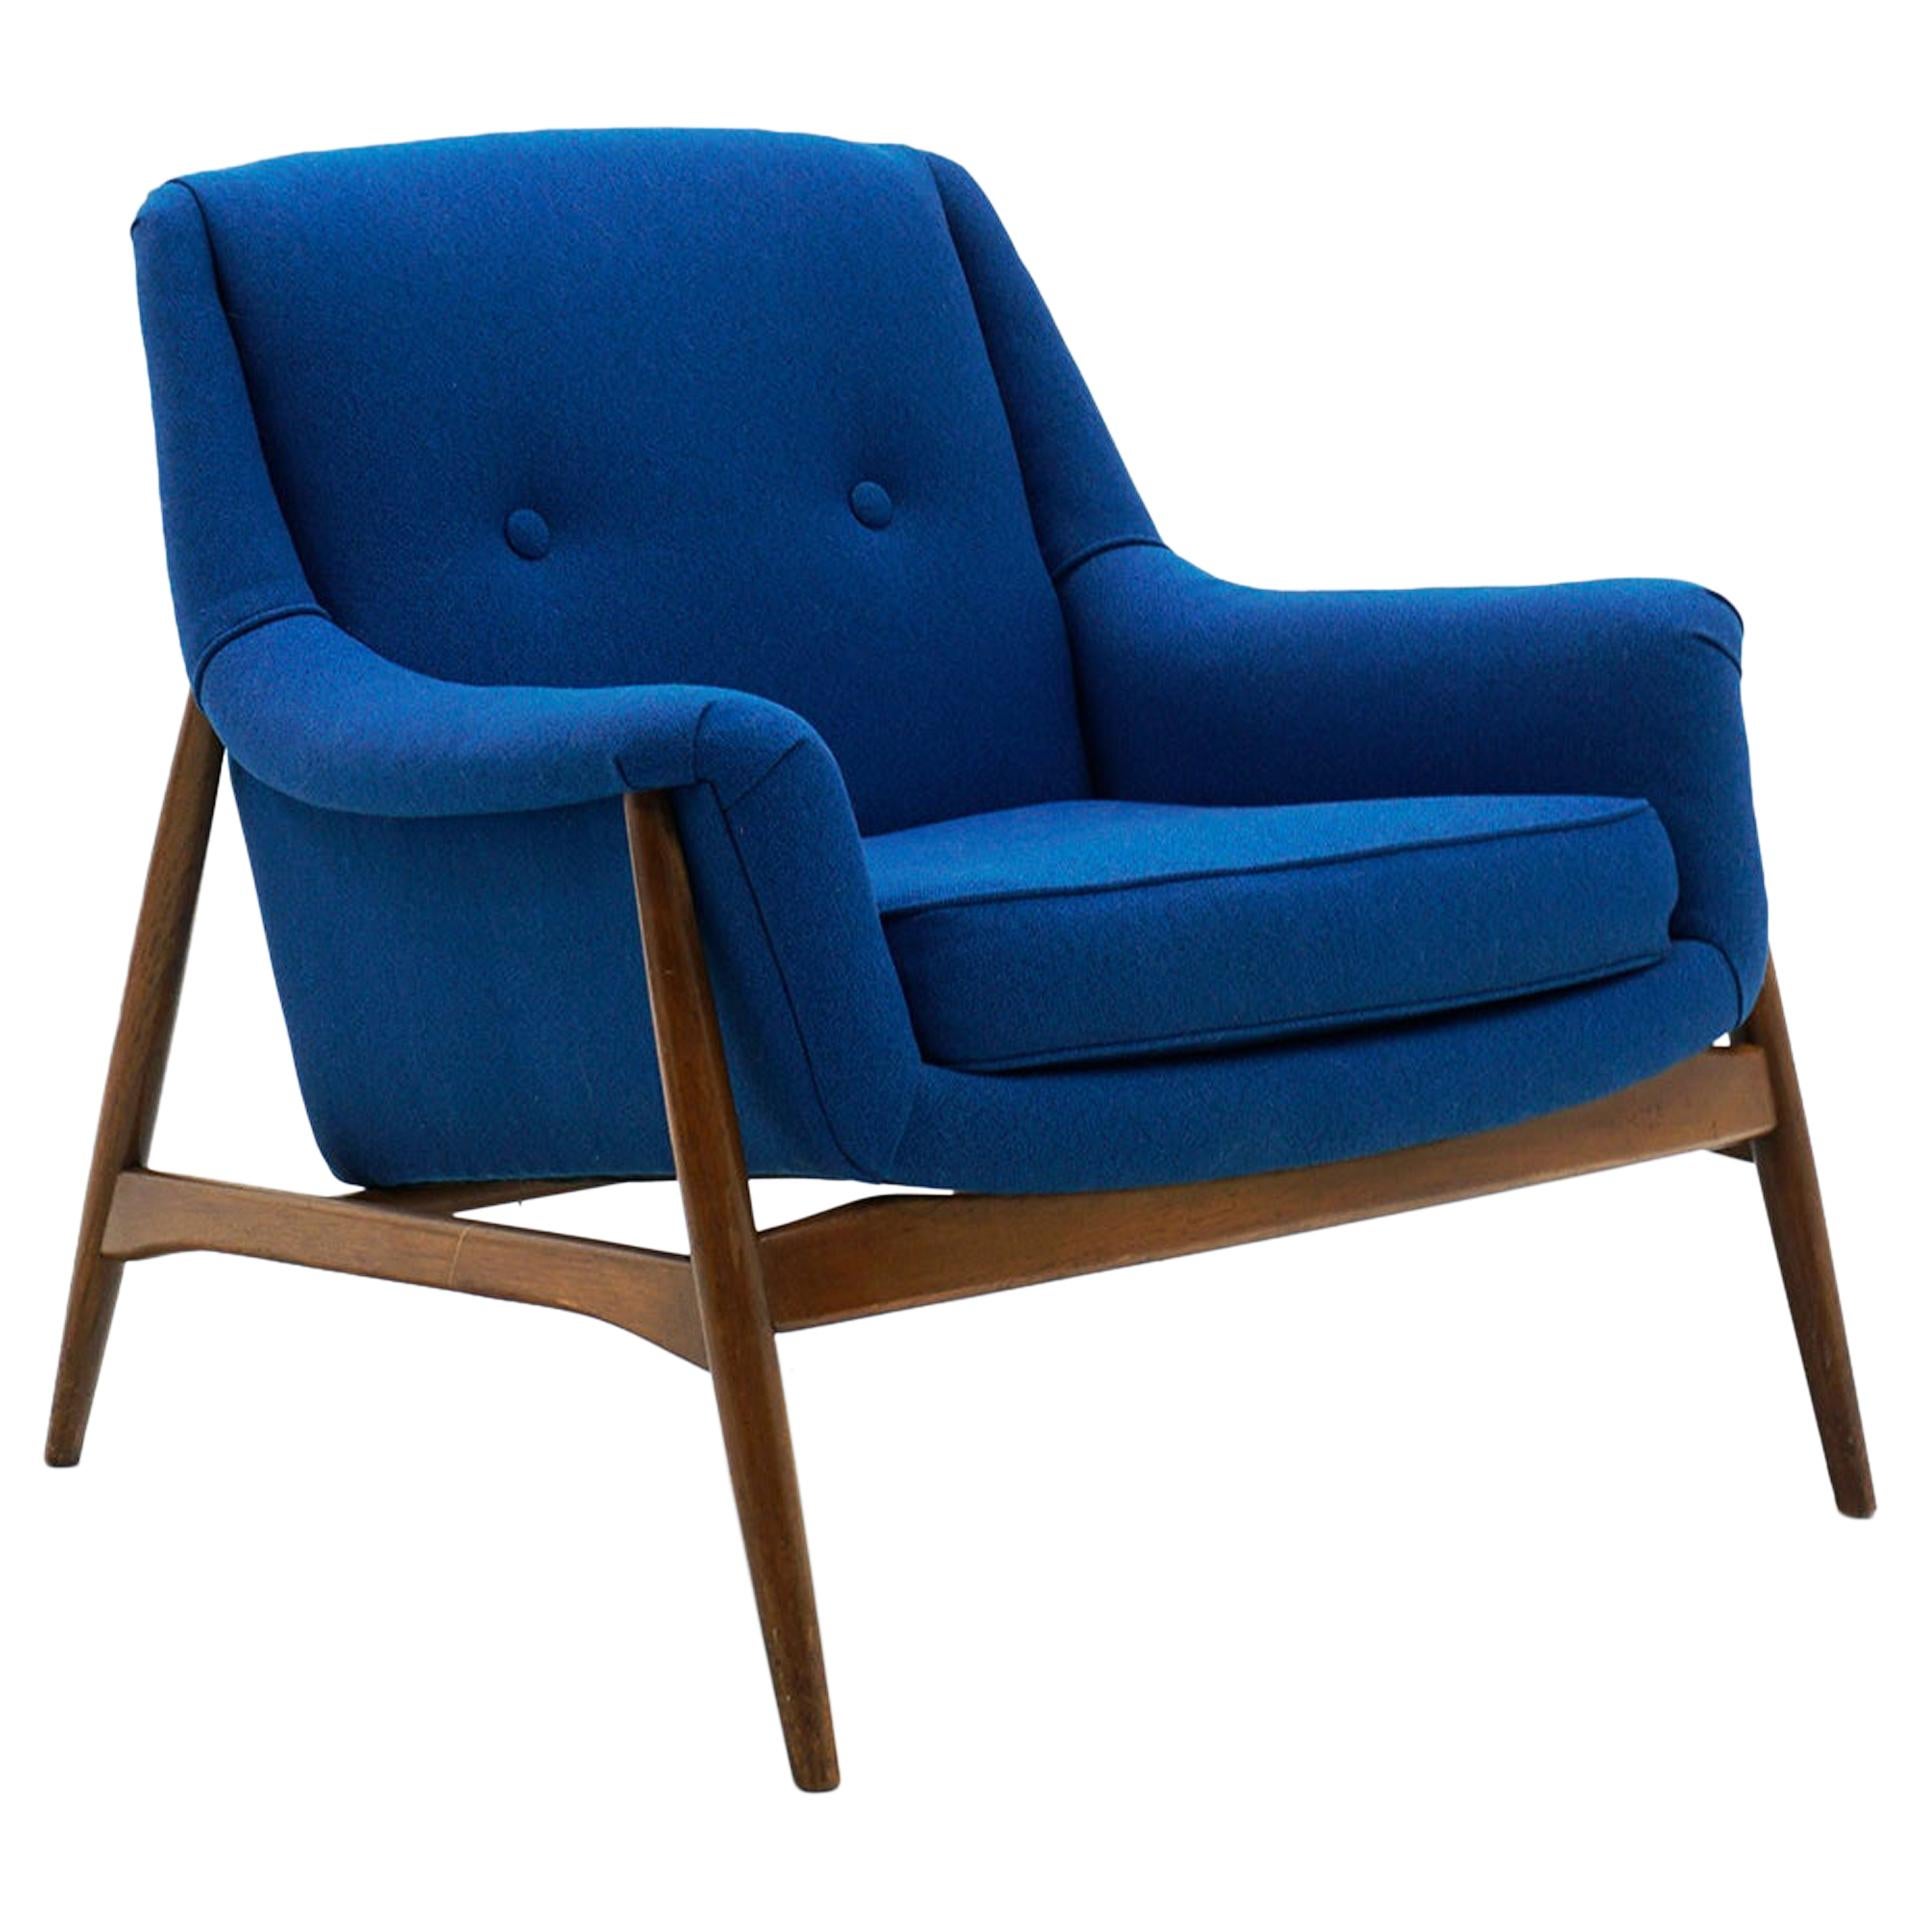 Danish Modern Lounge Chair with Arms, Teak with New Blue Maharam Upholstery